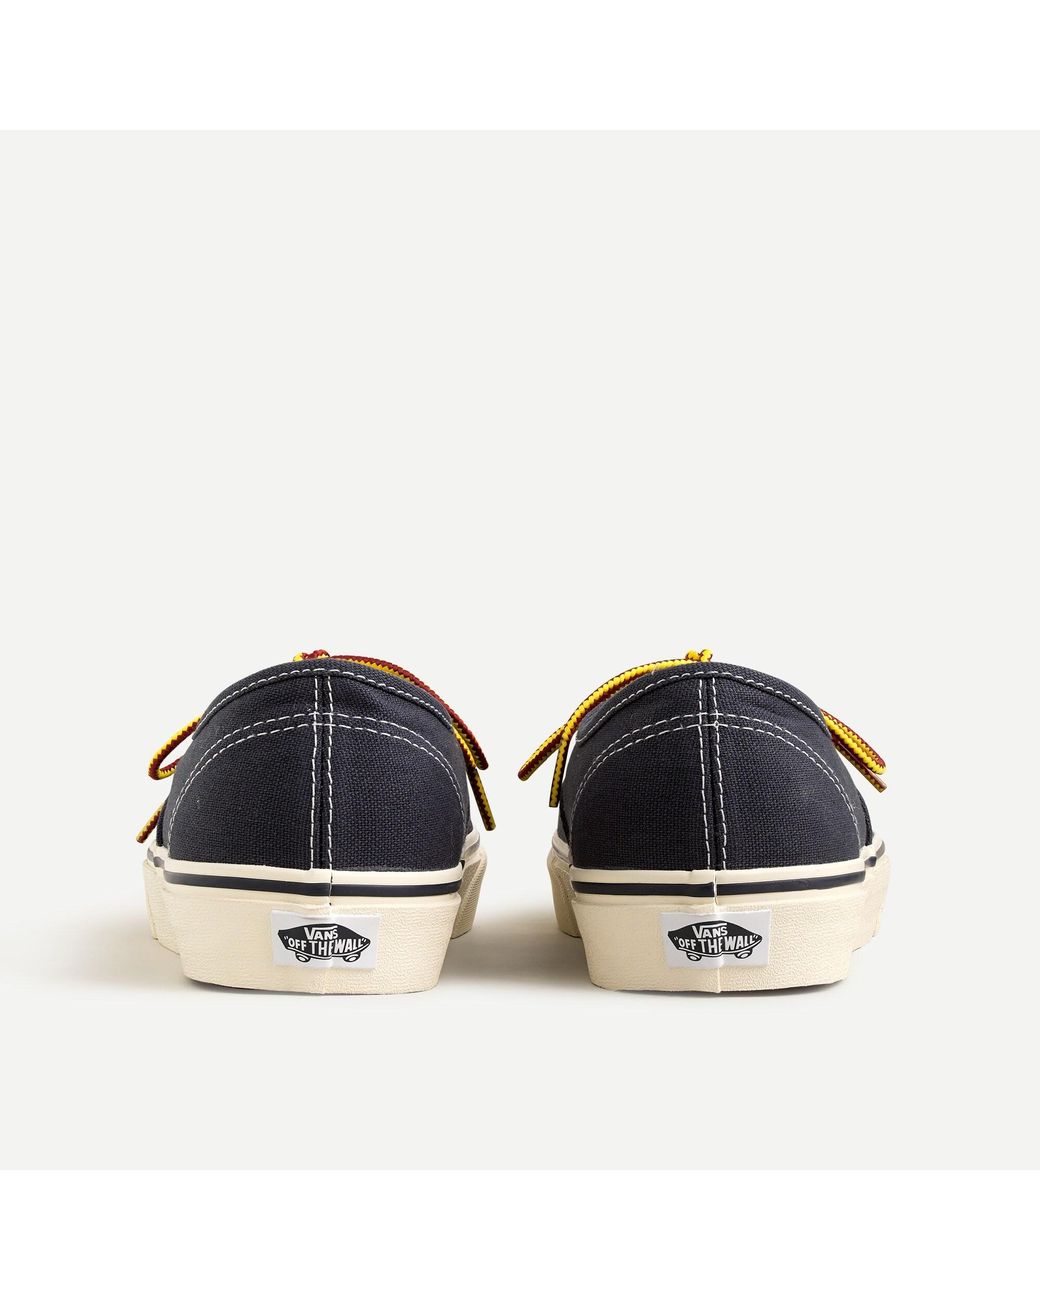 Vans ® For J.crew Washed Canvas Authentic Sneakers in Dark Navy (Blue) |  Lyst